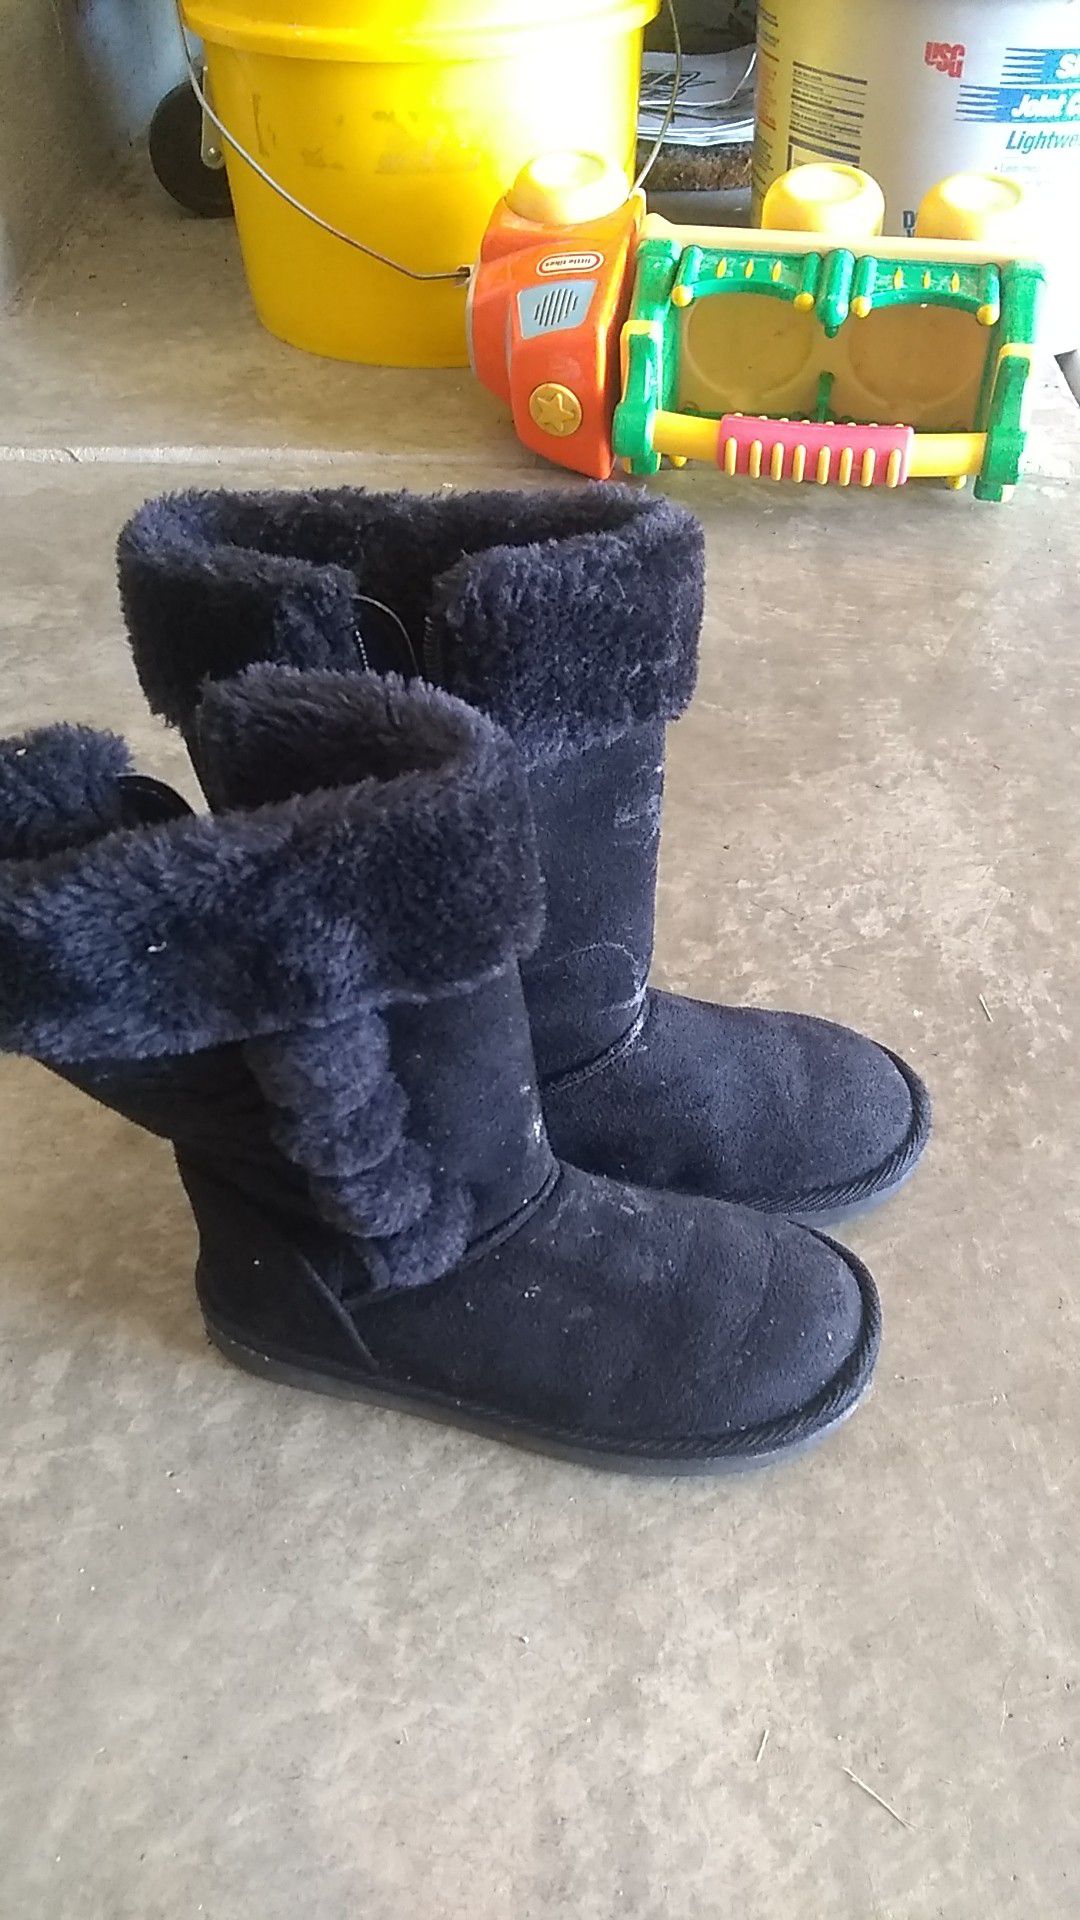 Girls size 12 black boots